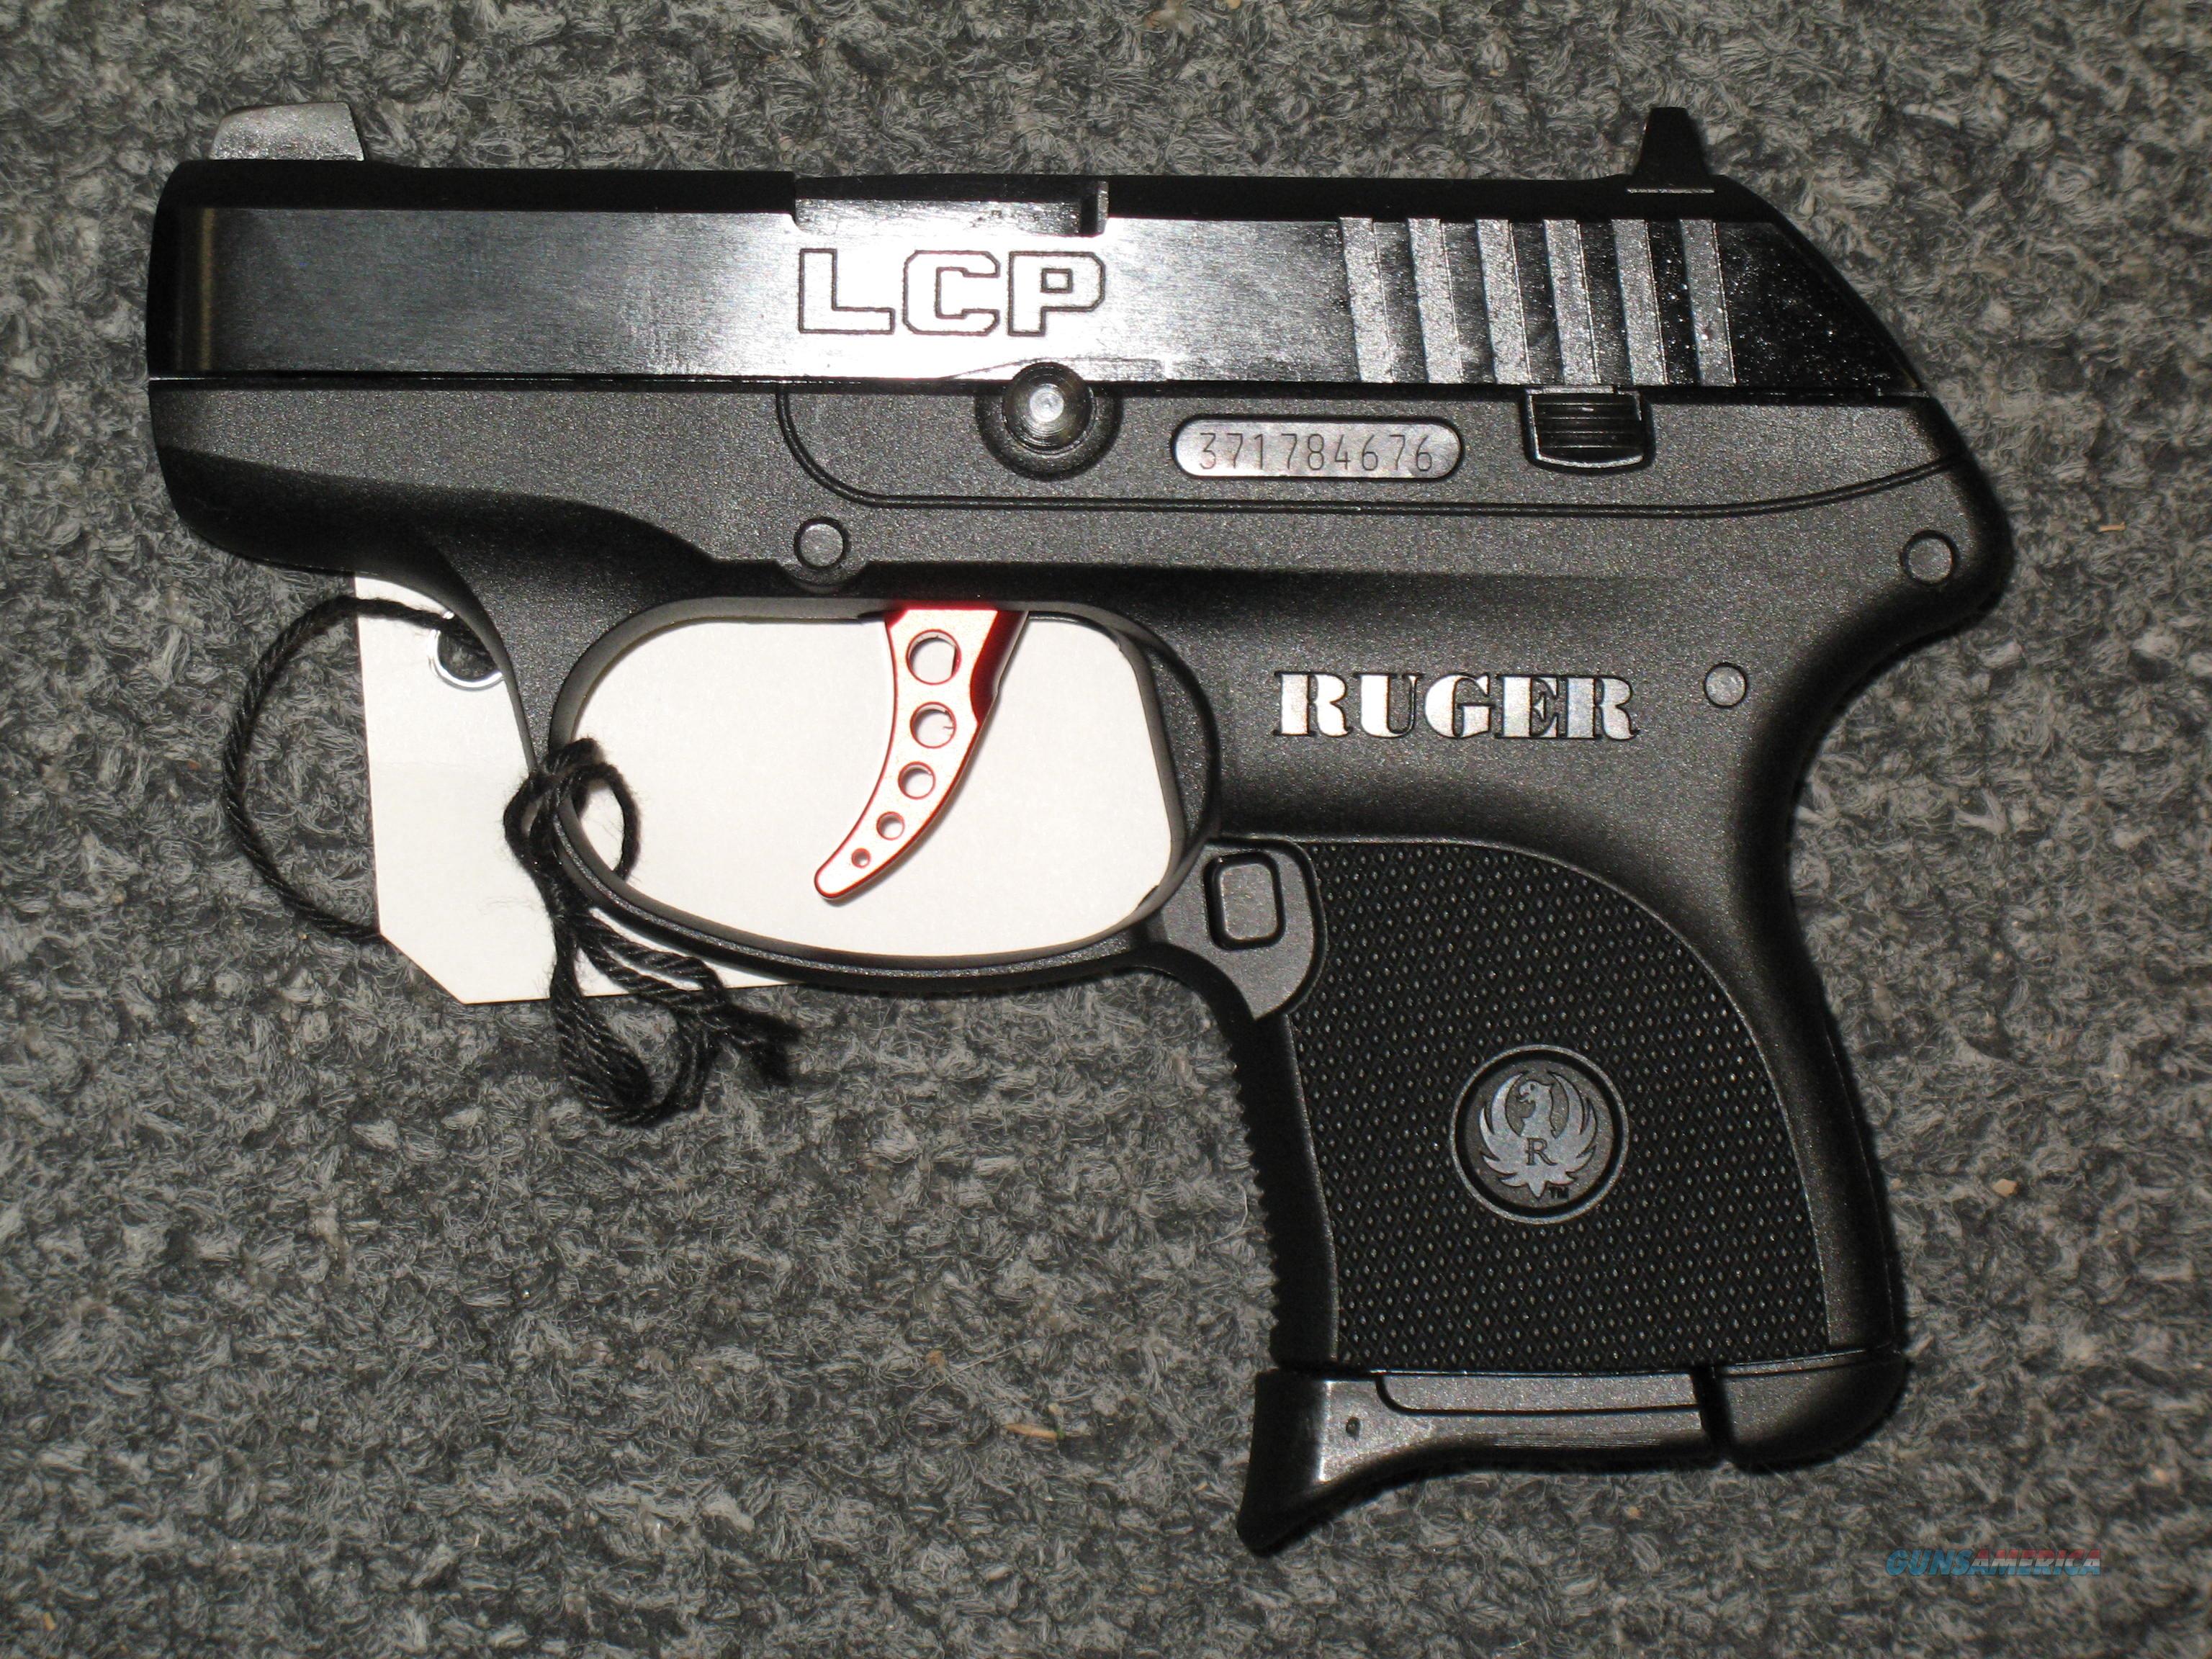 Ruger Lcp Custom For Sale At 925514154 9193